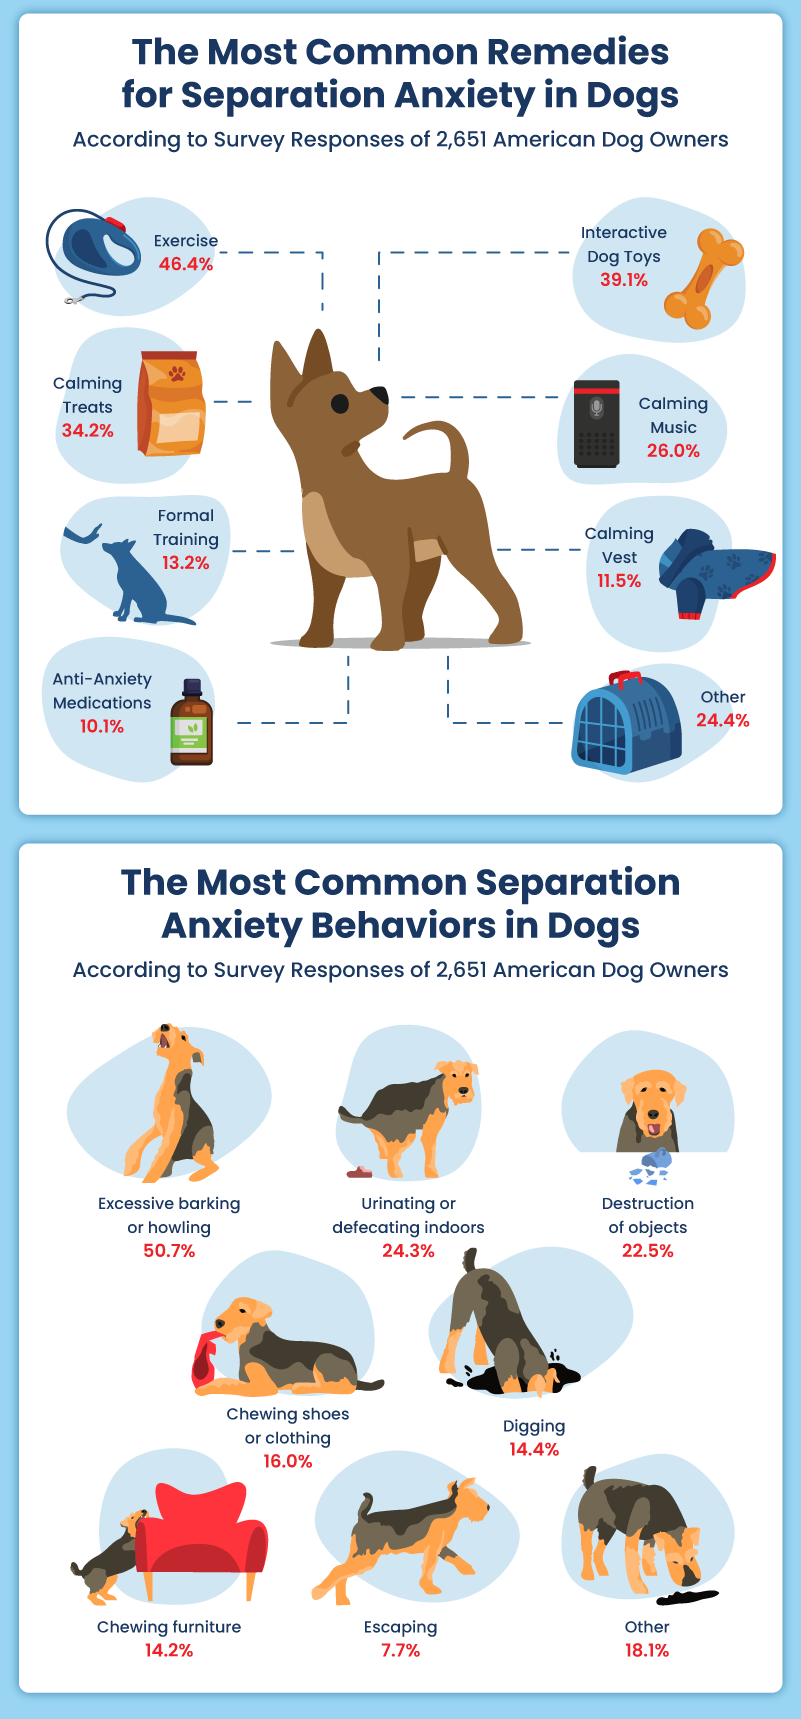 Infographic showing the most common behaviors in anxious dogs and remedies for anxious dogs